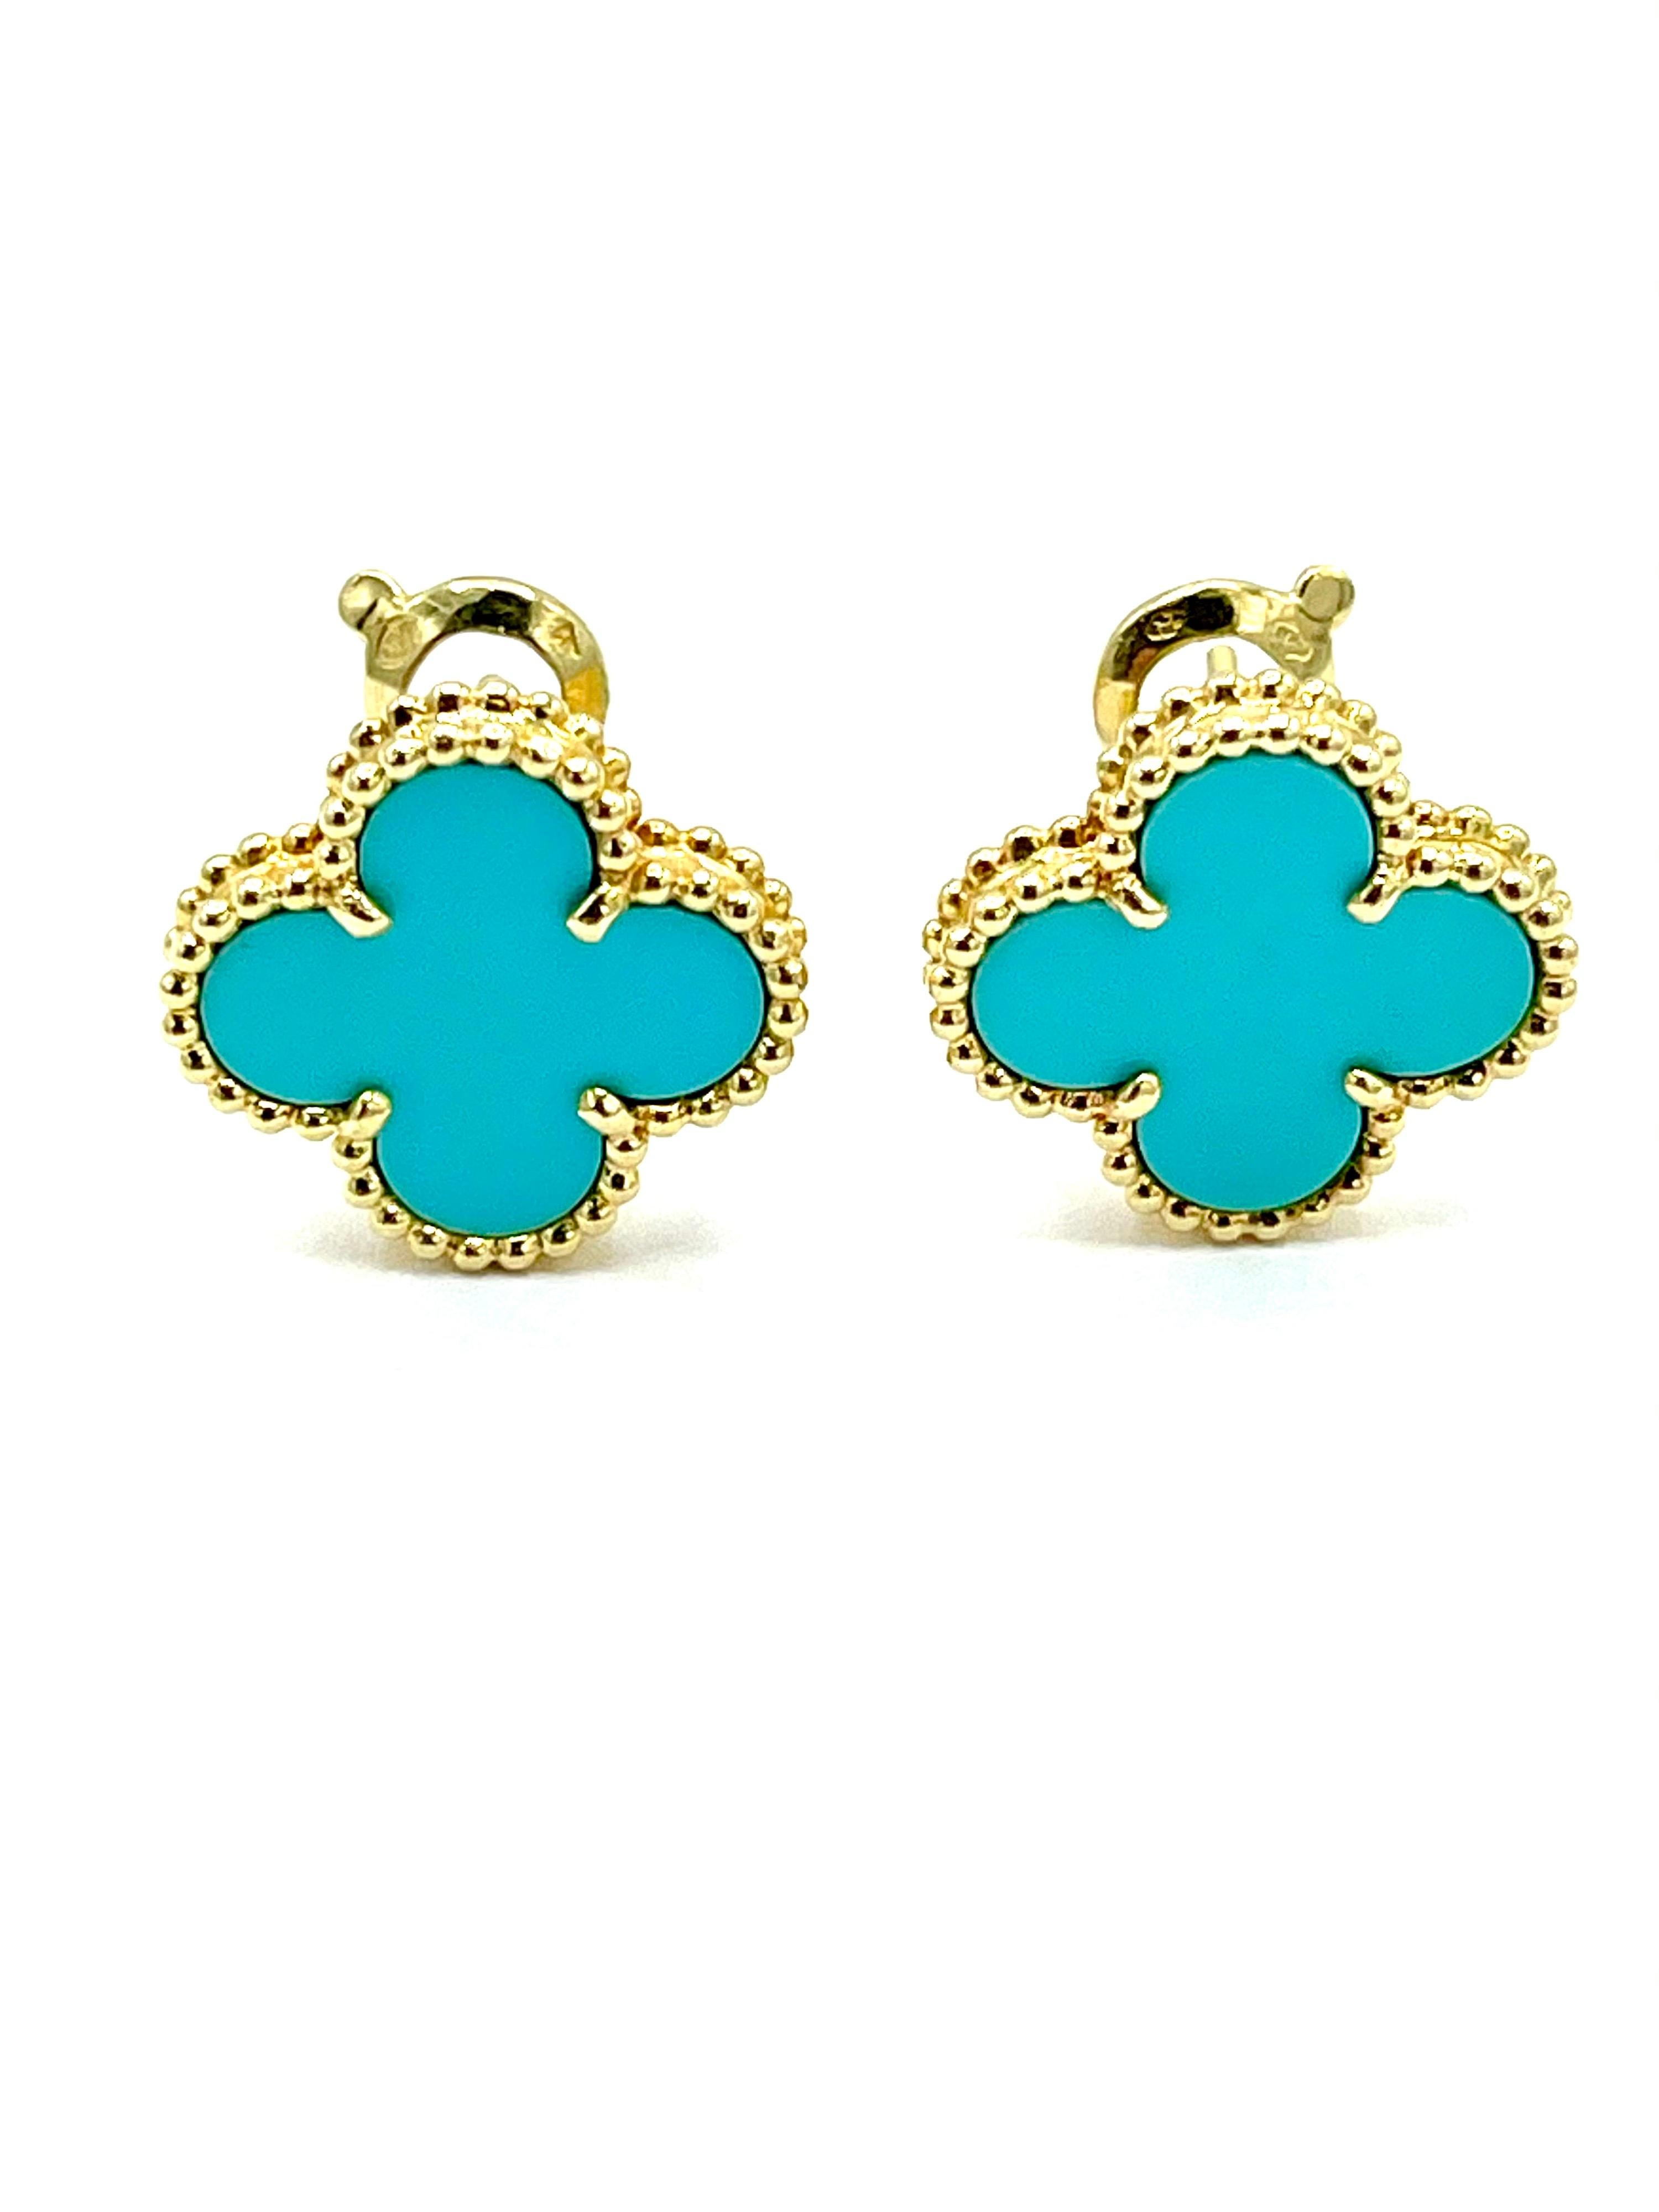 The highly sought after Alhambra collection by Van Cleef & Arpels.  These 18k yellow gold earrings feature a beautiful colored turquoise, measuring 15mm x 15mm each, with a post and clip back.  Signed 